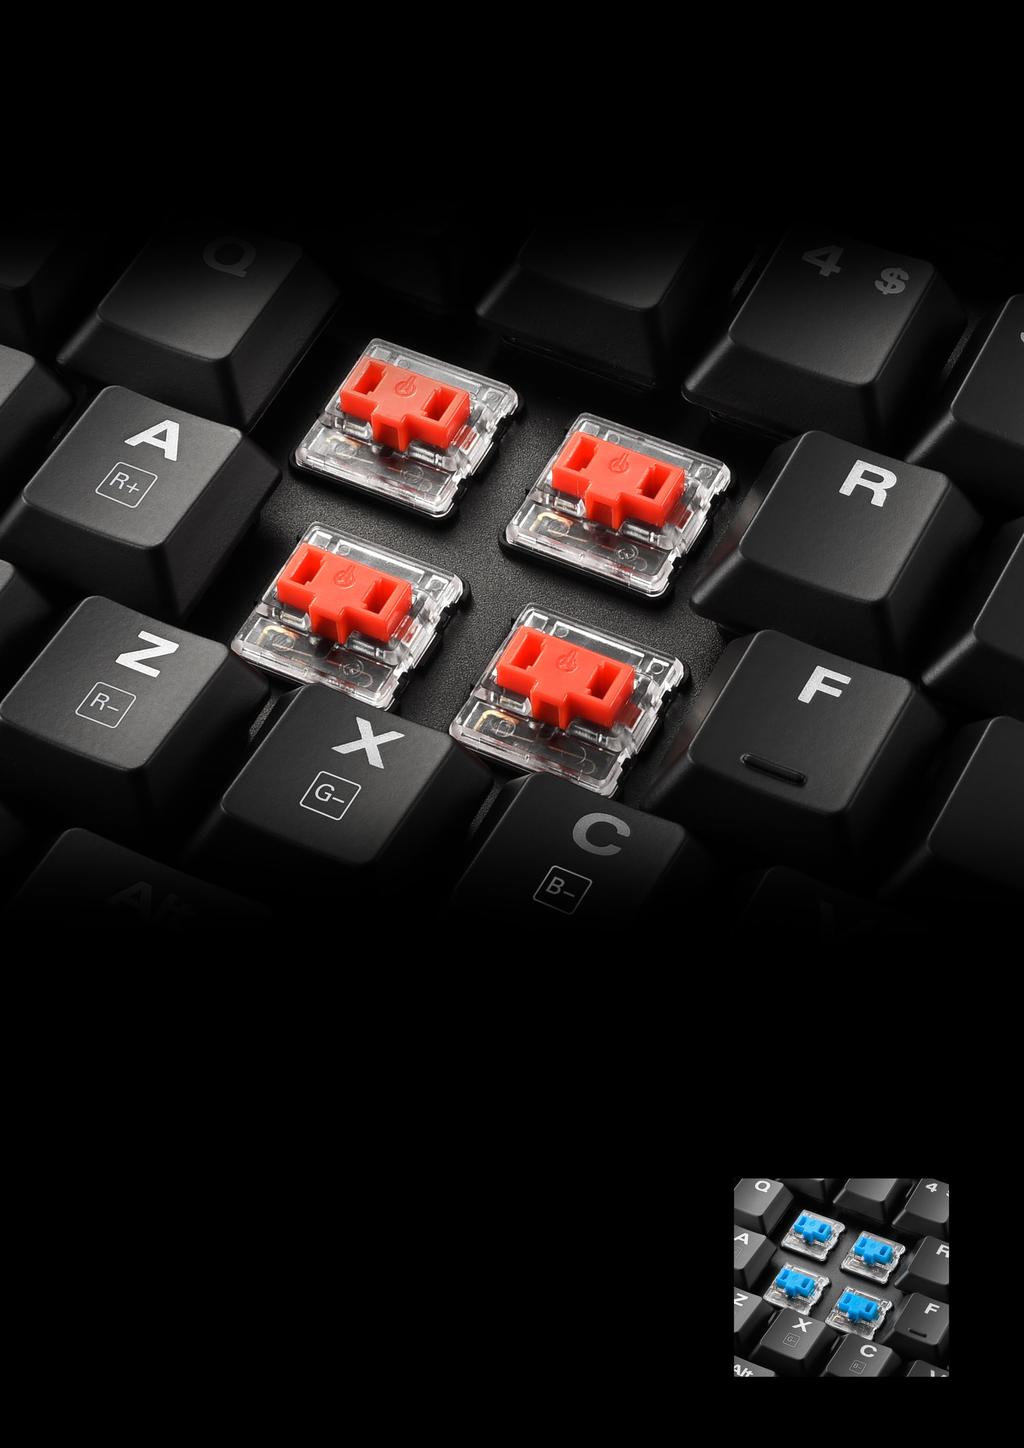 MECHANICAL LOW-PROFILE SWITCHES (KAILH) PURE TYPING PLEASURE FOR WRITERS Many writers particularly do not want to miss out on its blue switches. With a distance to actuation point of only 1.